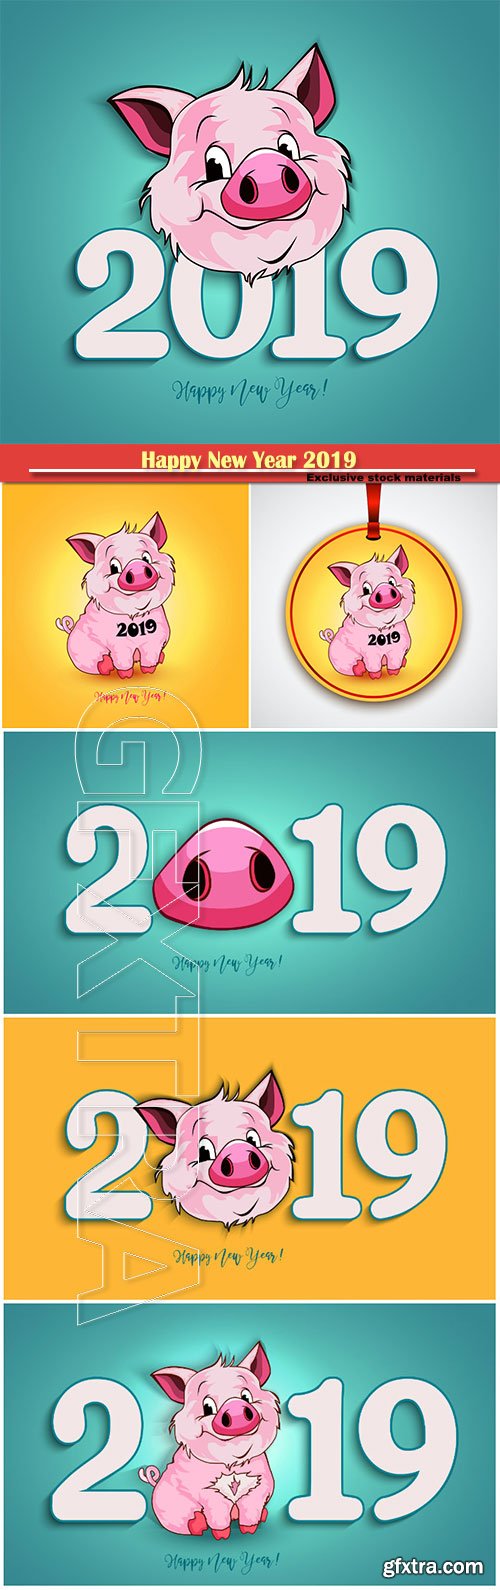 Happy New Year 2019 funny card design with cartoon pigs